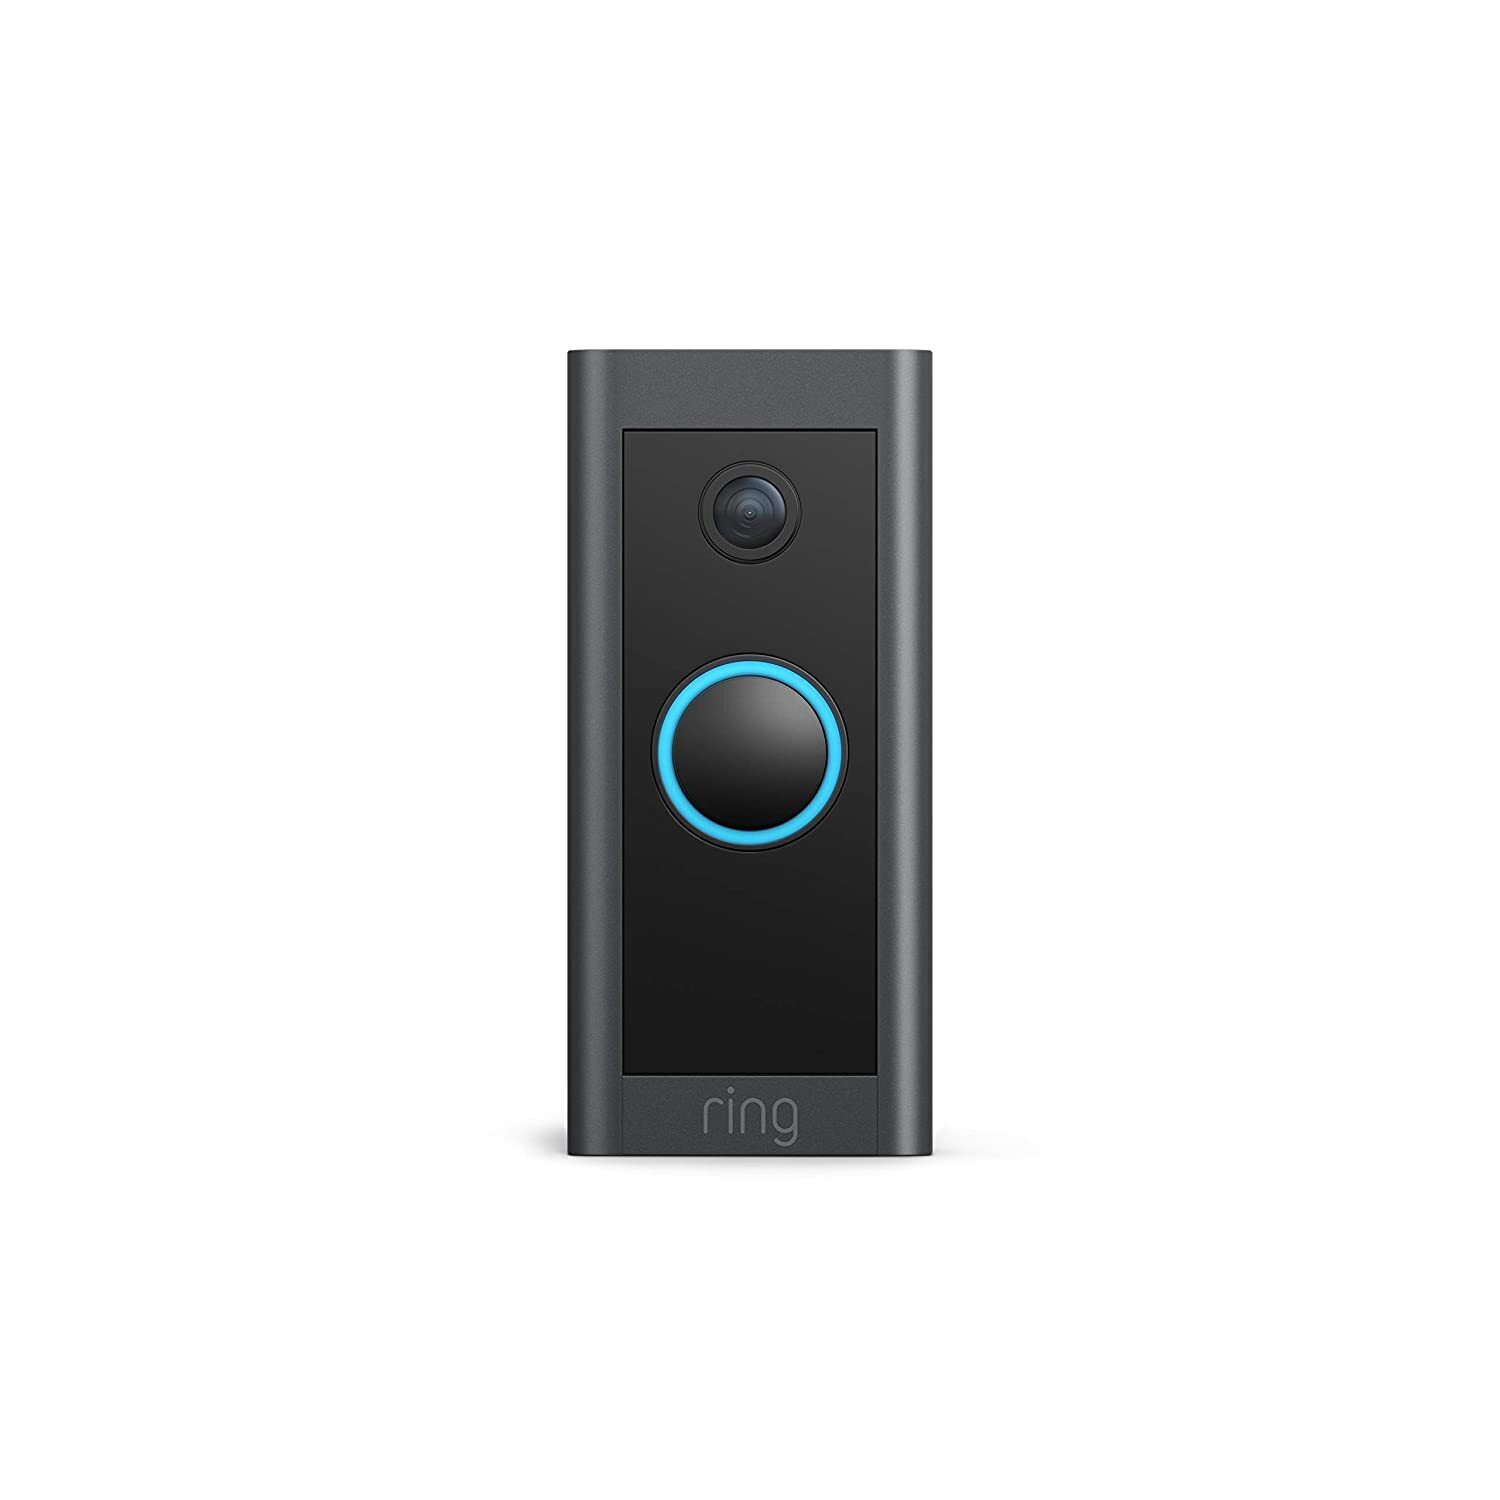 Wired Doorbell Chime with Smart Technology